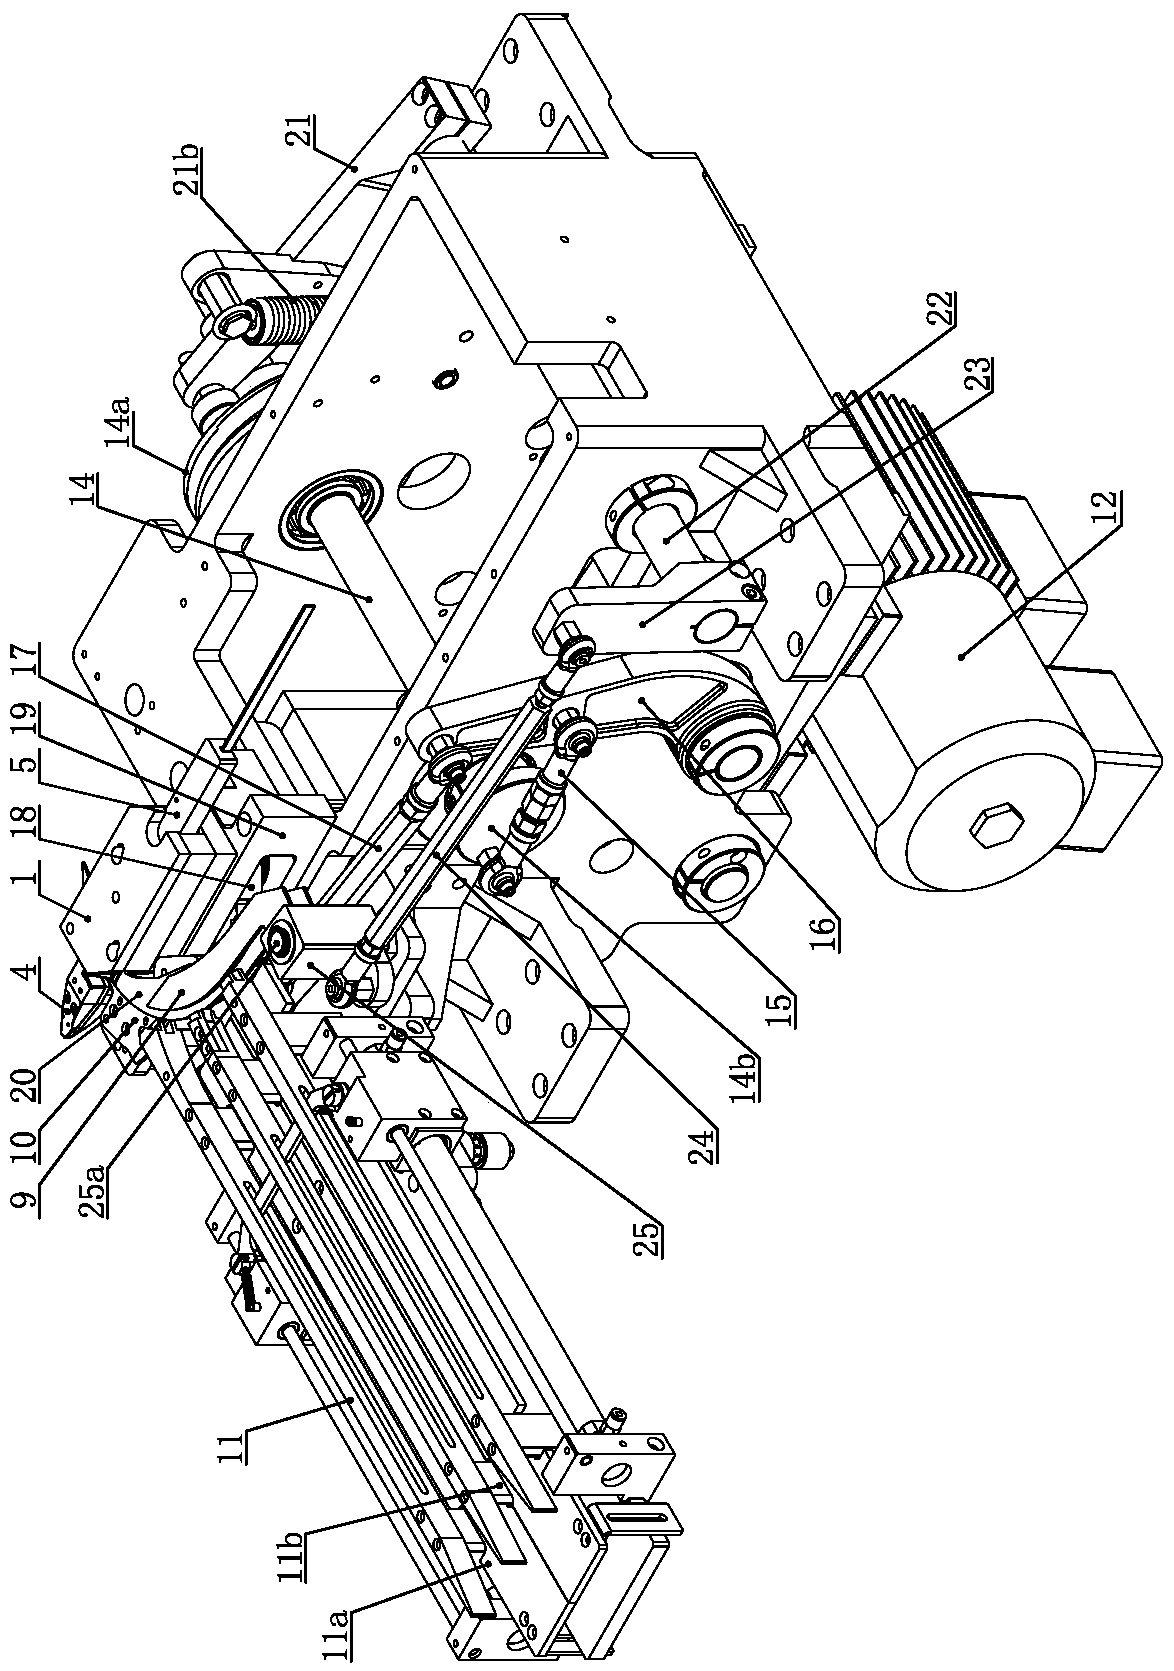 Color mixing brittle implanting device and color mixing bristle implanting method